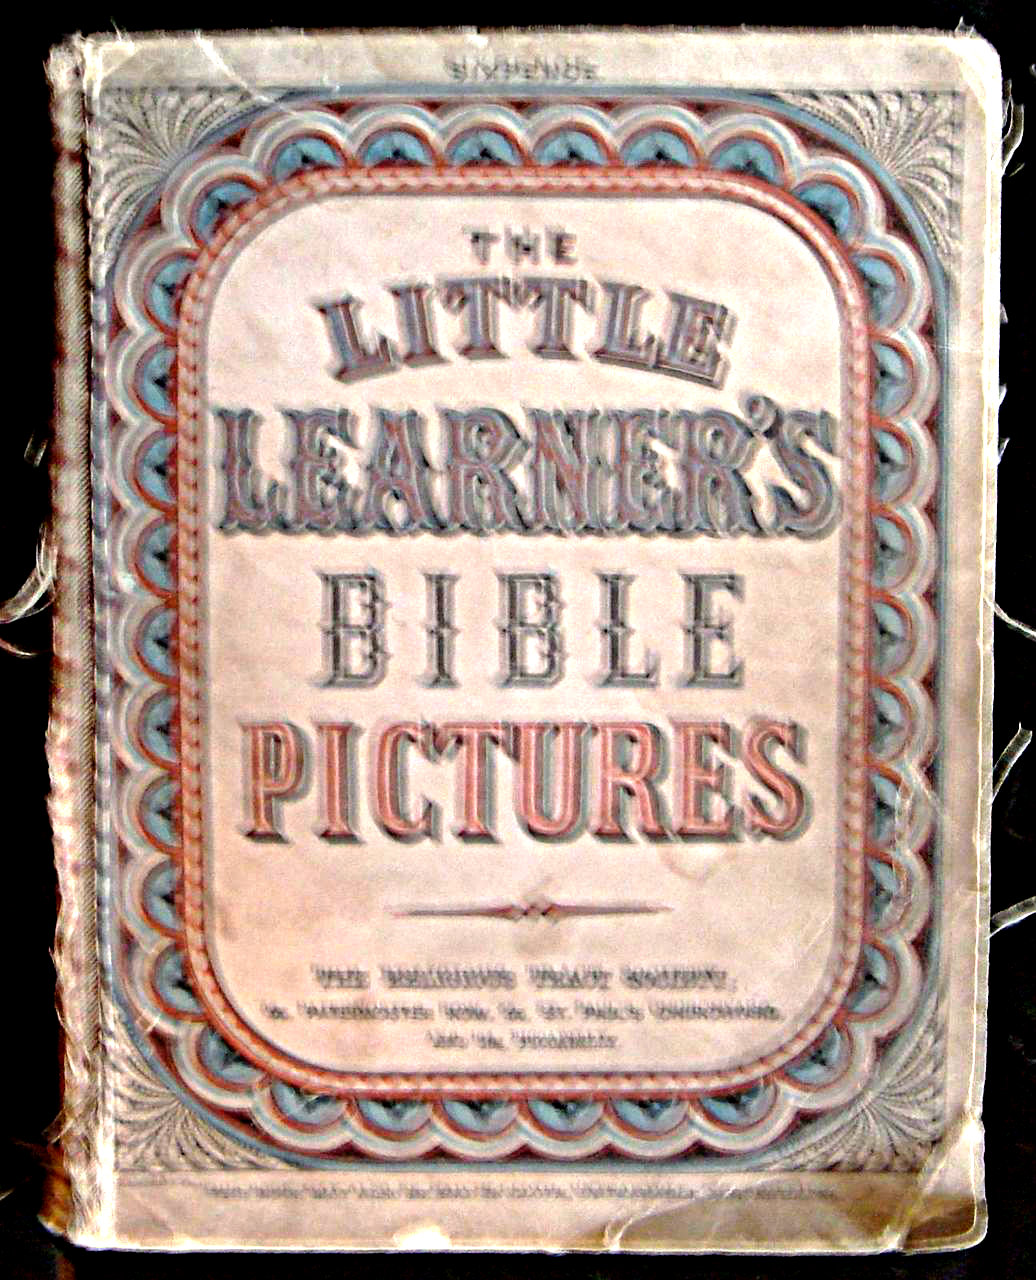 THE LITTLE LEARNER'S BIBLE PICTURES, by RTS, illustrations by Harold Copping - c.1910